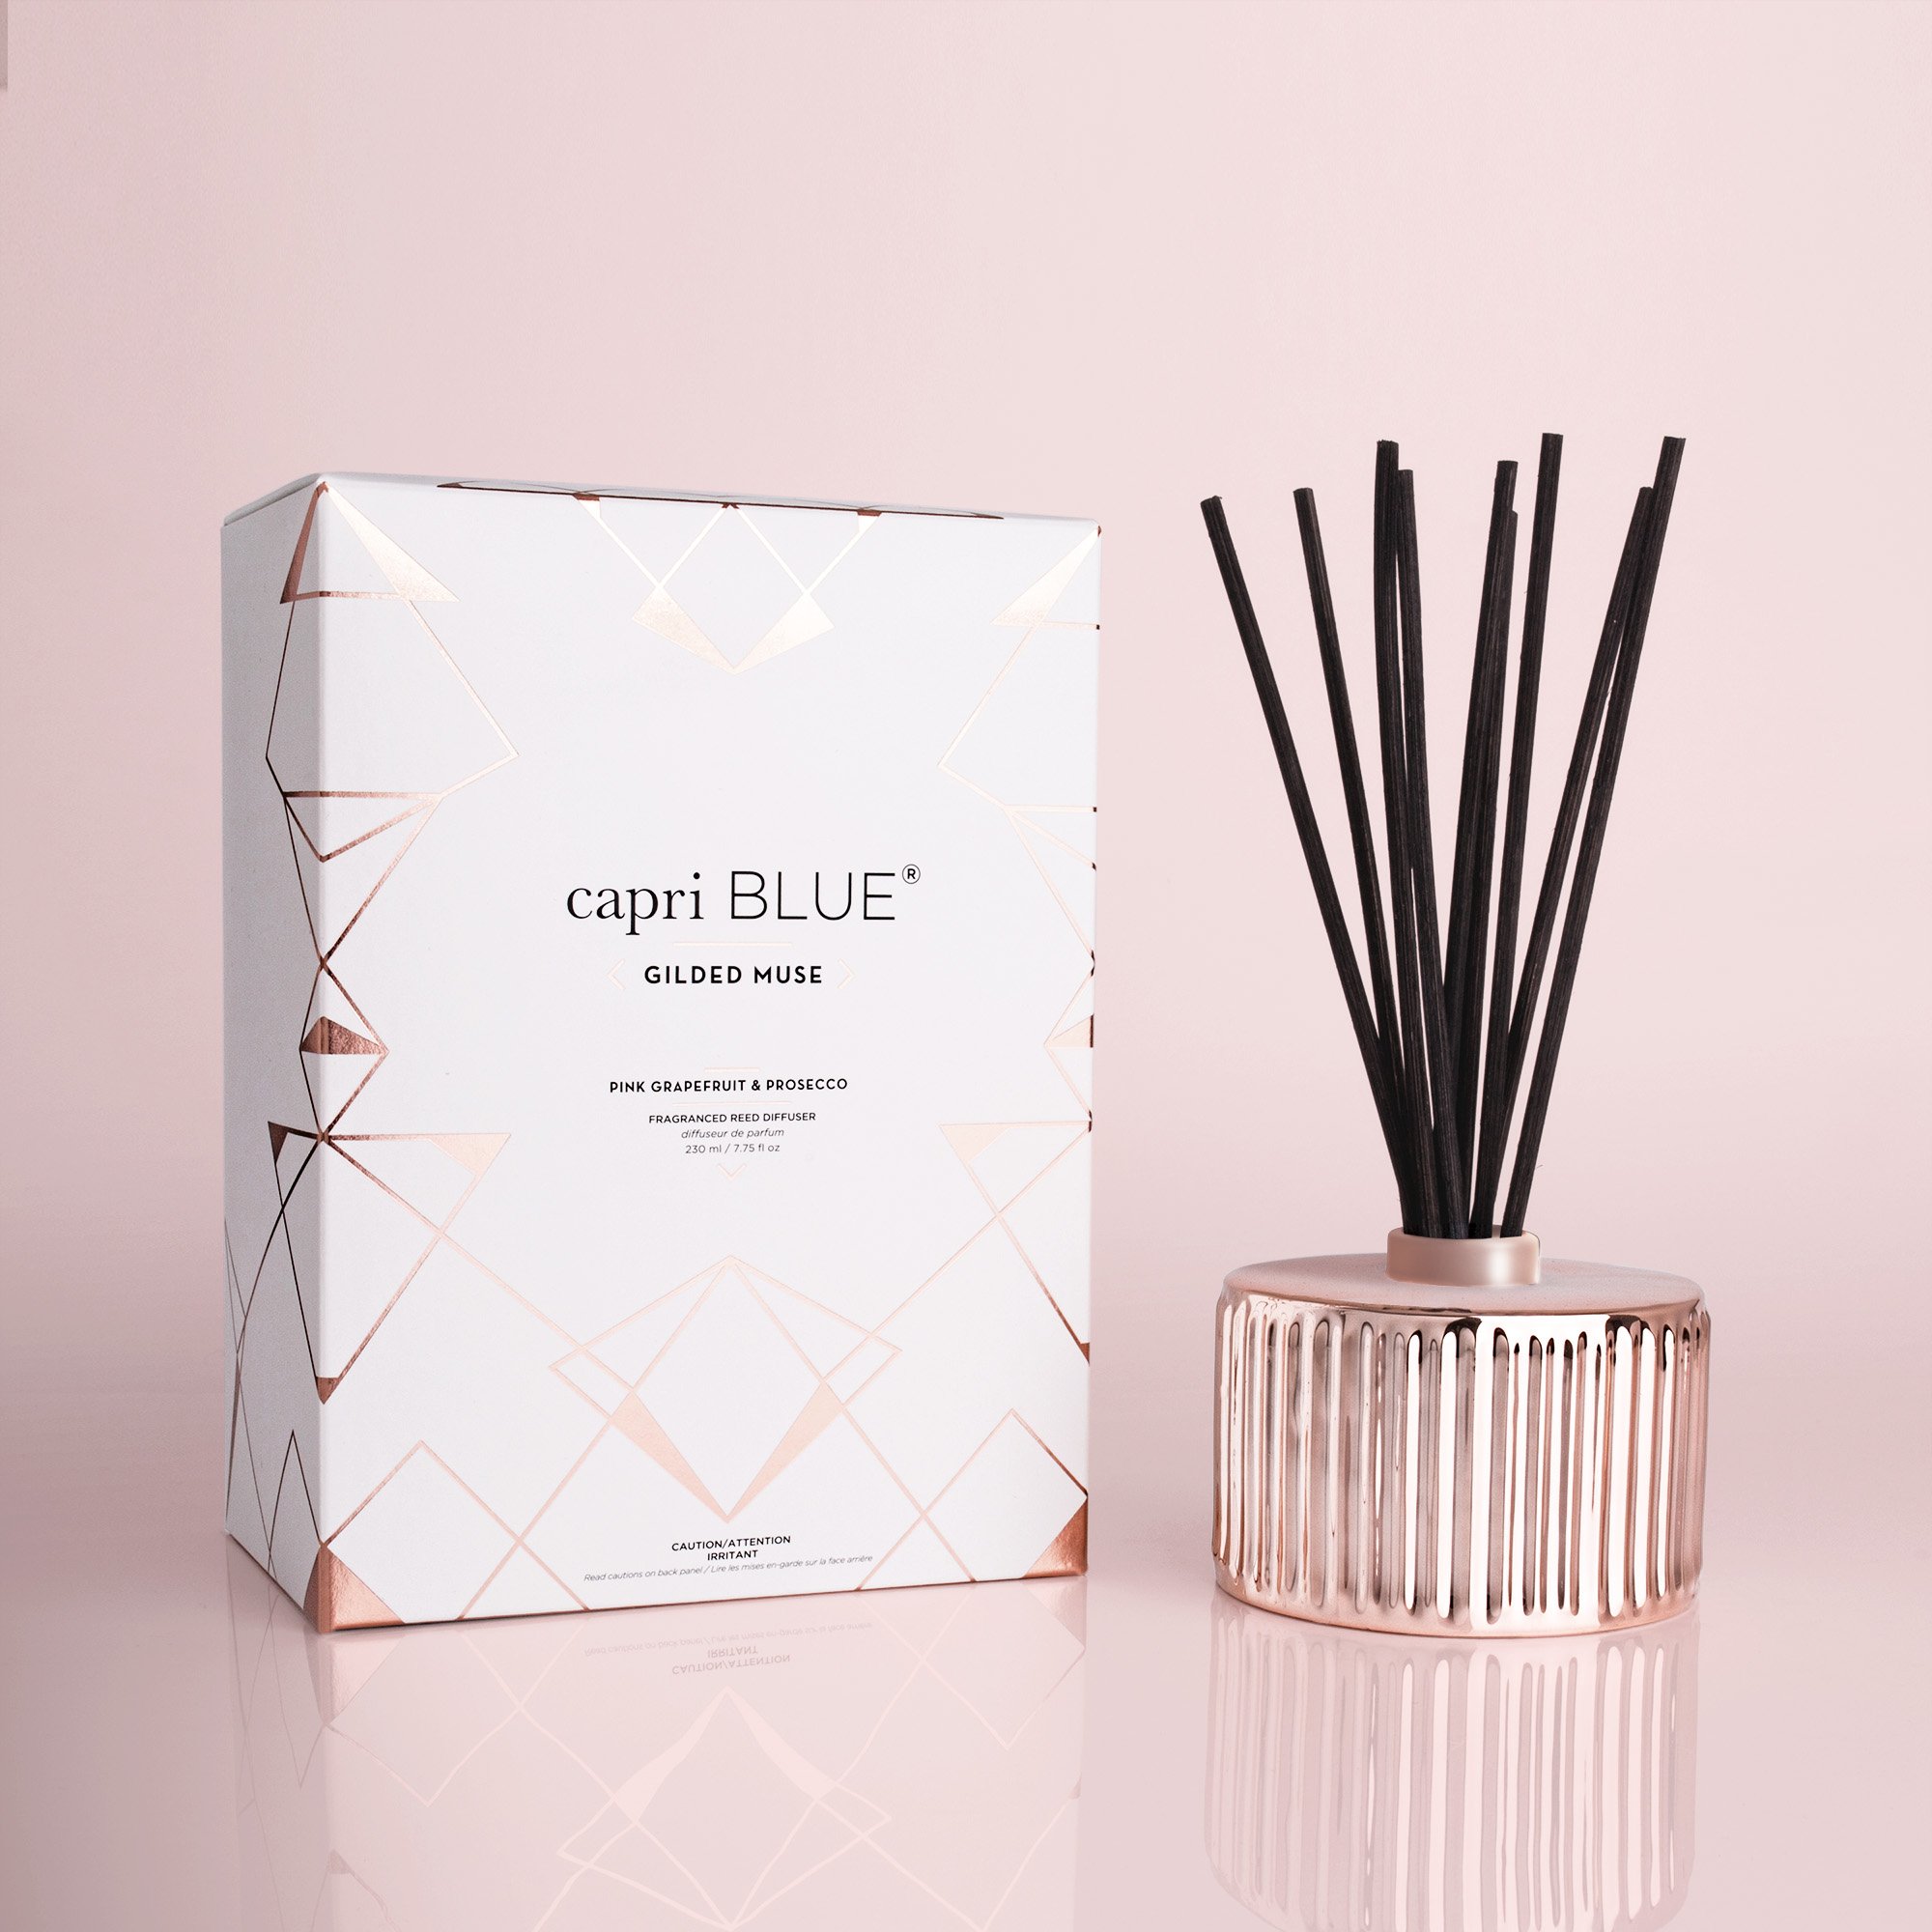 Pink Grapefruit & Prosecco Gilded Reed Diffuser 7.75 fl oz